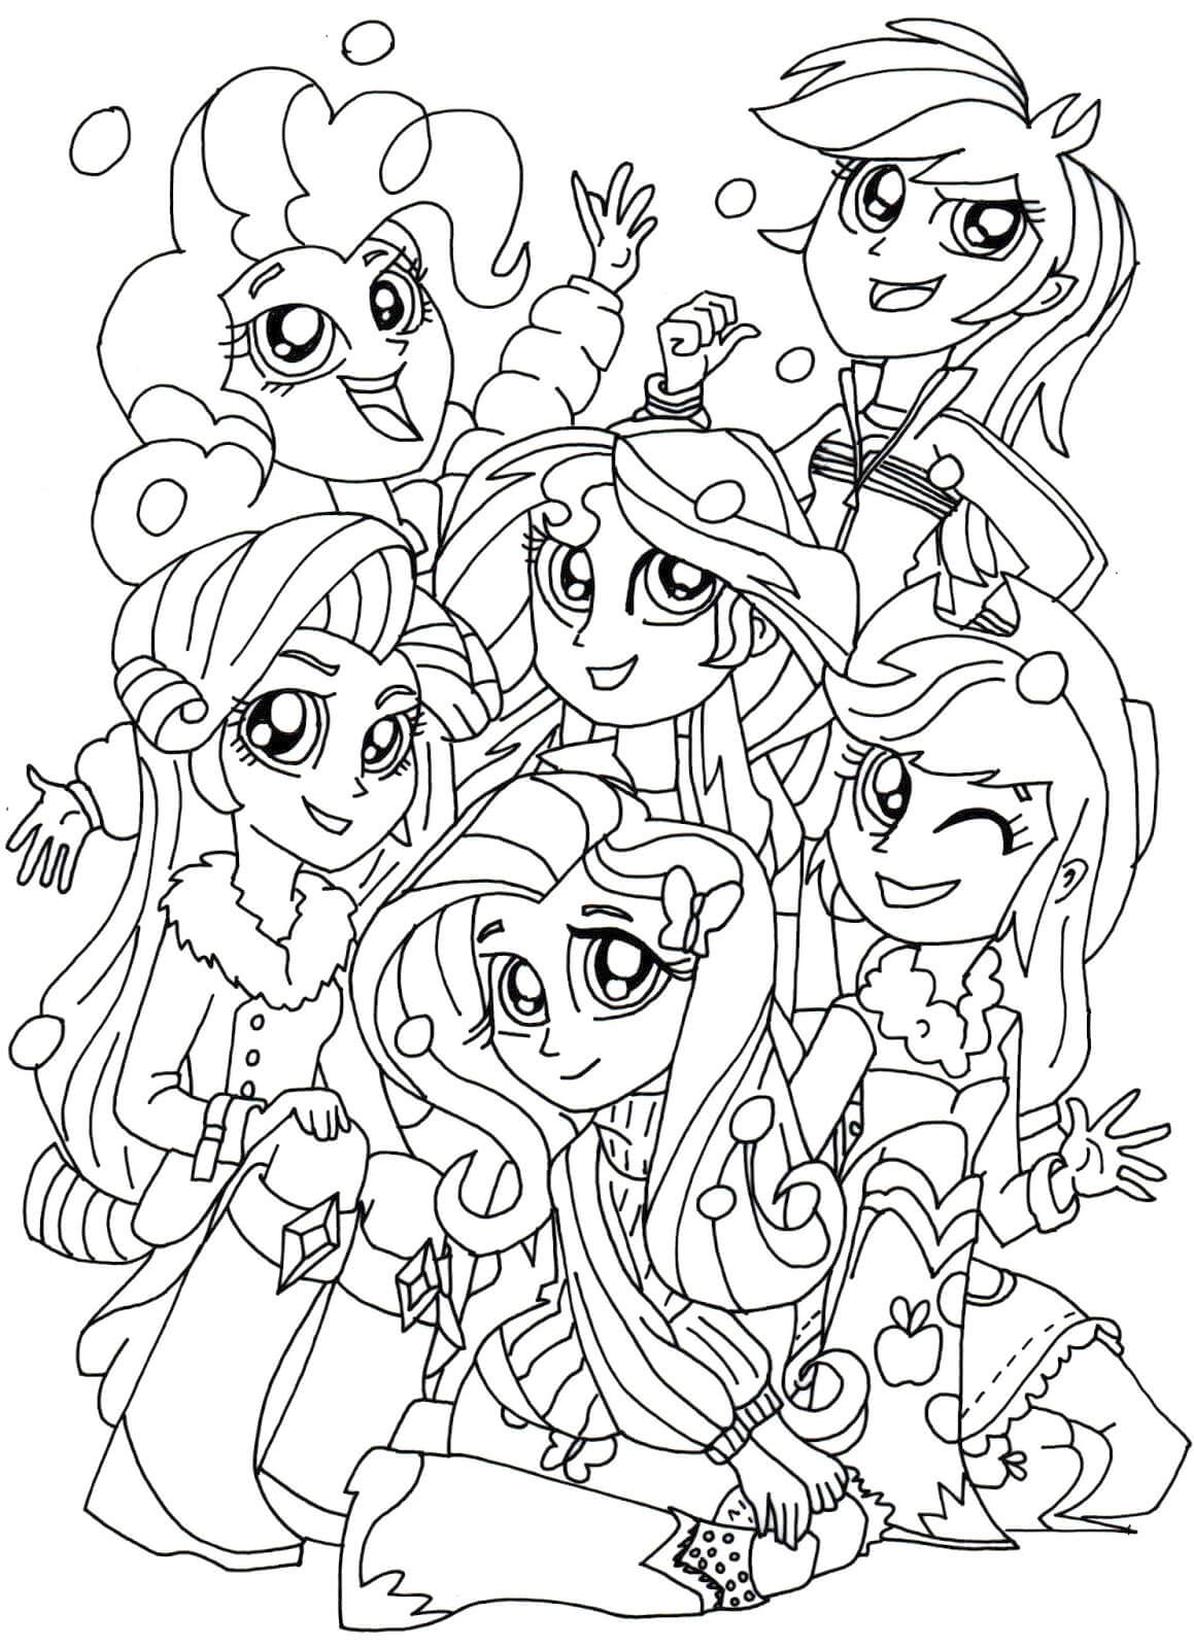 20+ Free Printable Equestria Girls Coloring Pages - EverFreeColoring.com